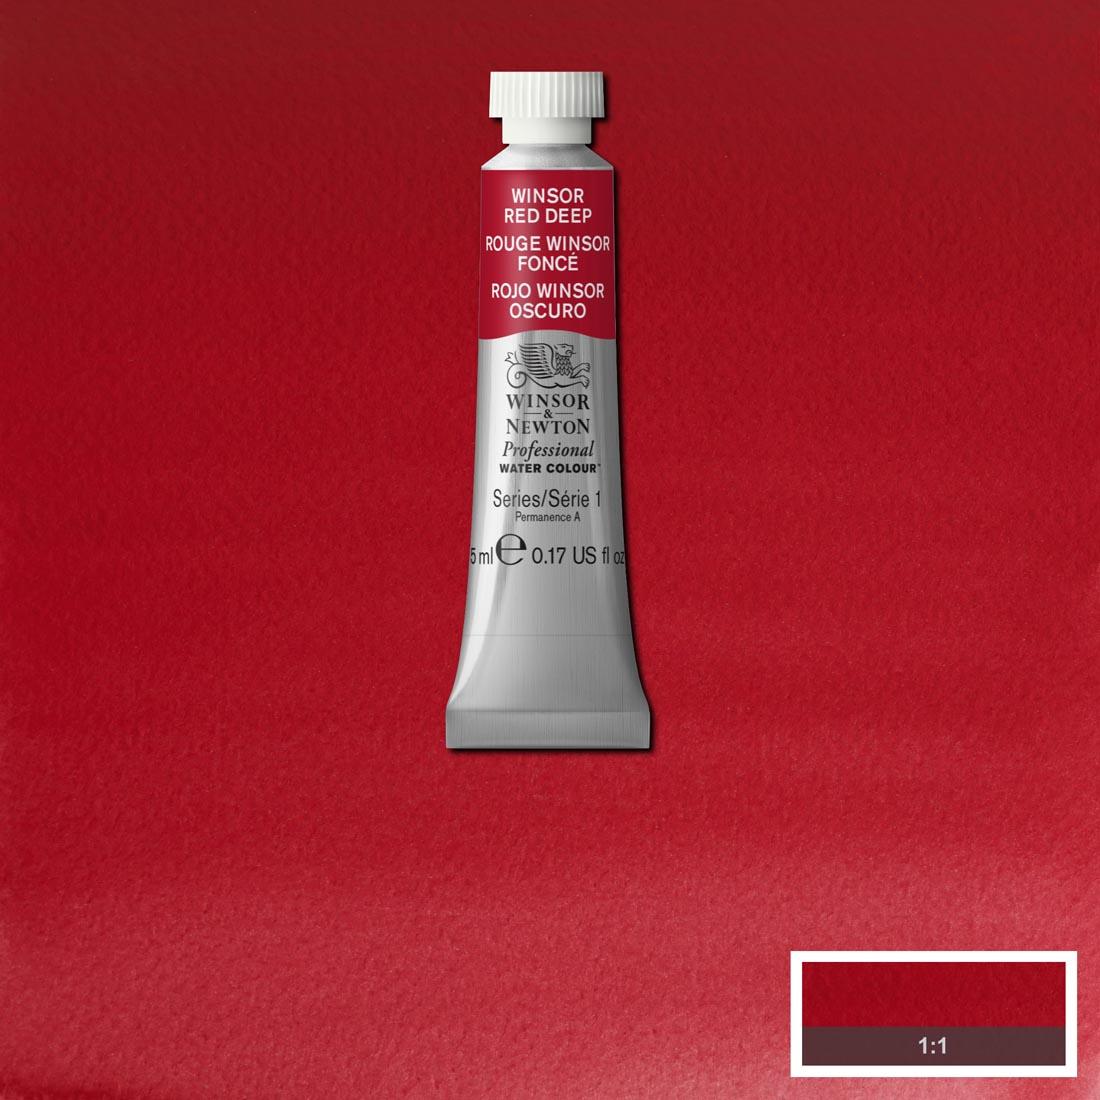 Tube of Winsor Red Deep Winsor & Newton Professional Water Colour with a paint swatch for the background